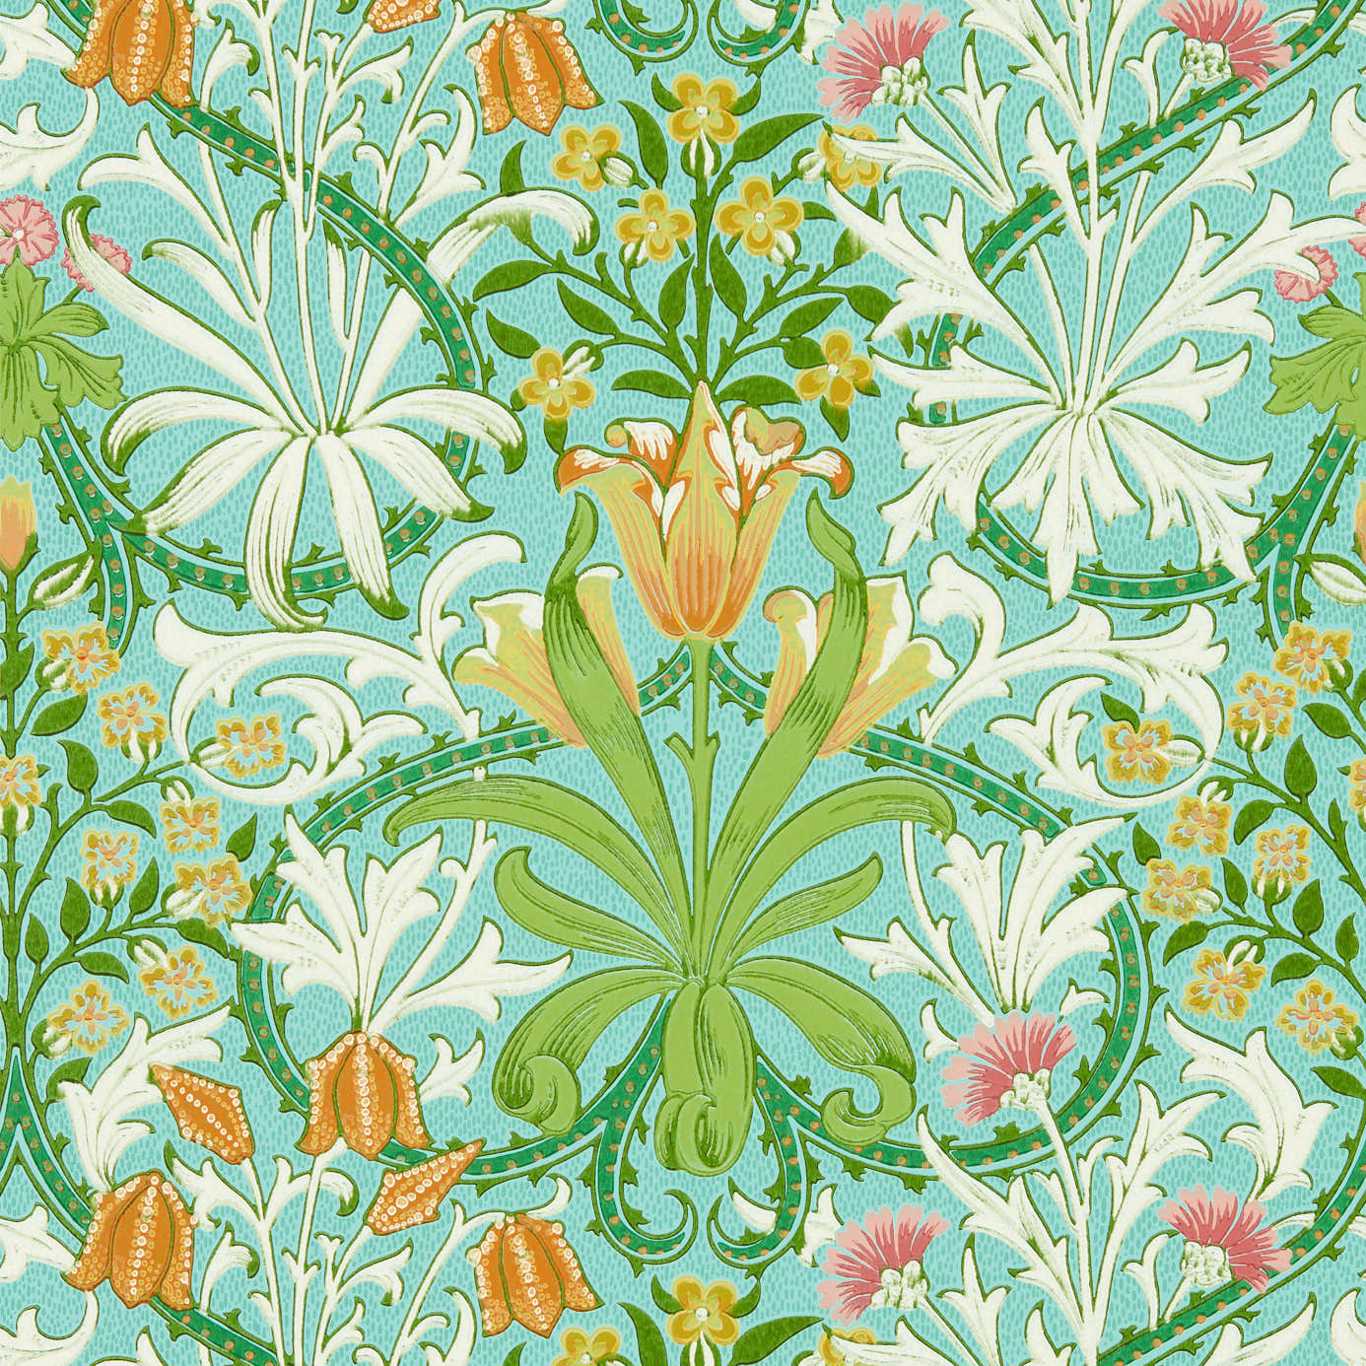 Woodland Weeds Orange/Turquoise Wallpaper MCOW217101 by Morris & Co